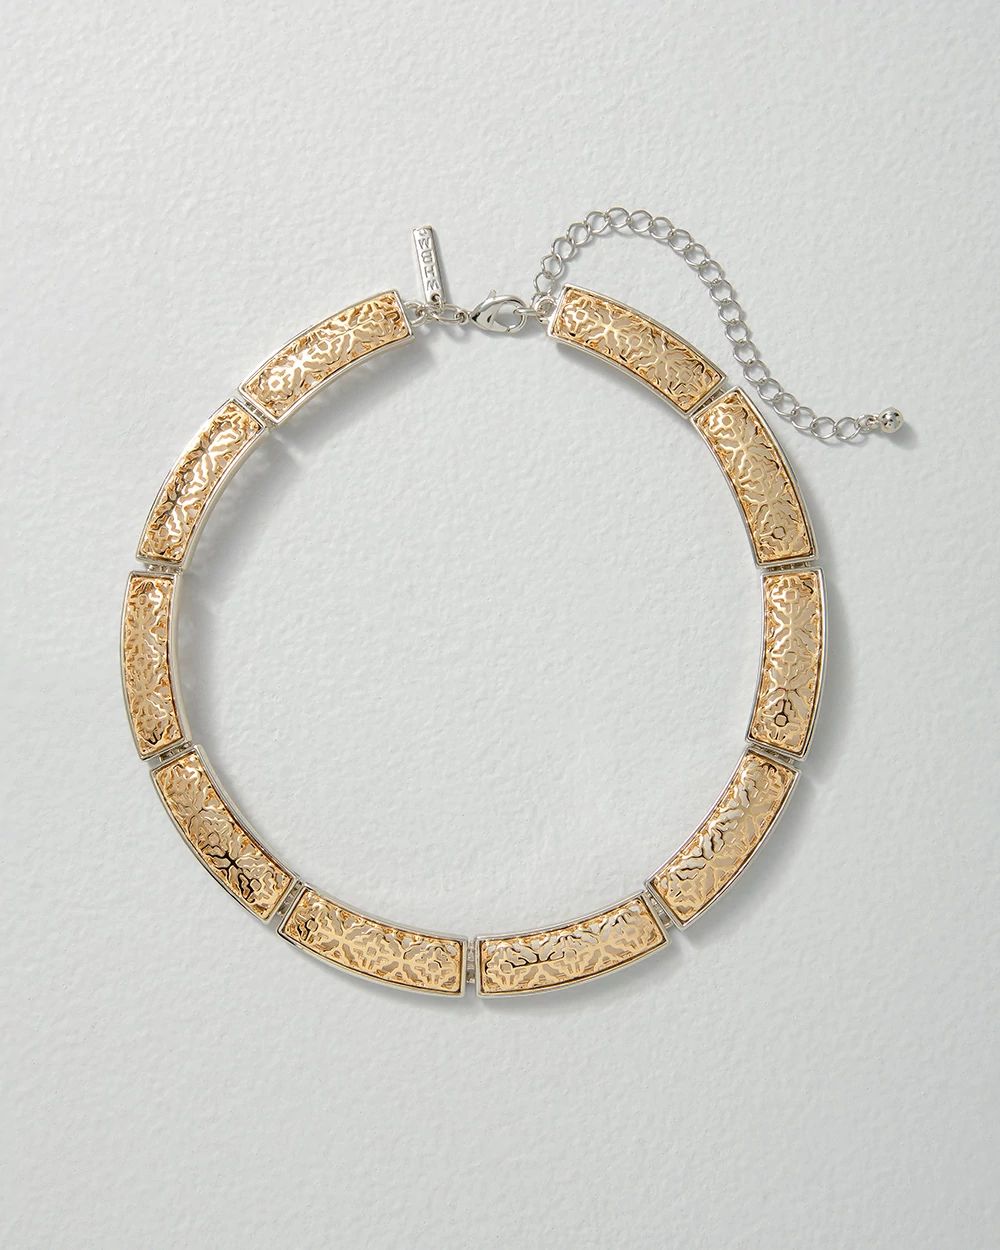 Goldtone + Silvertone  Collar Necklace click to view larger image.